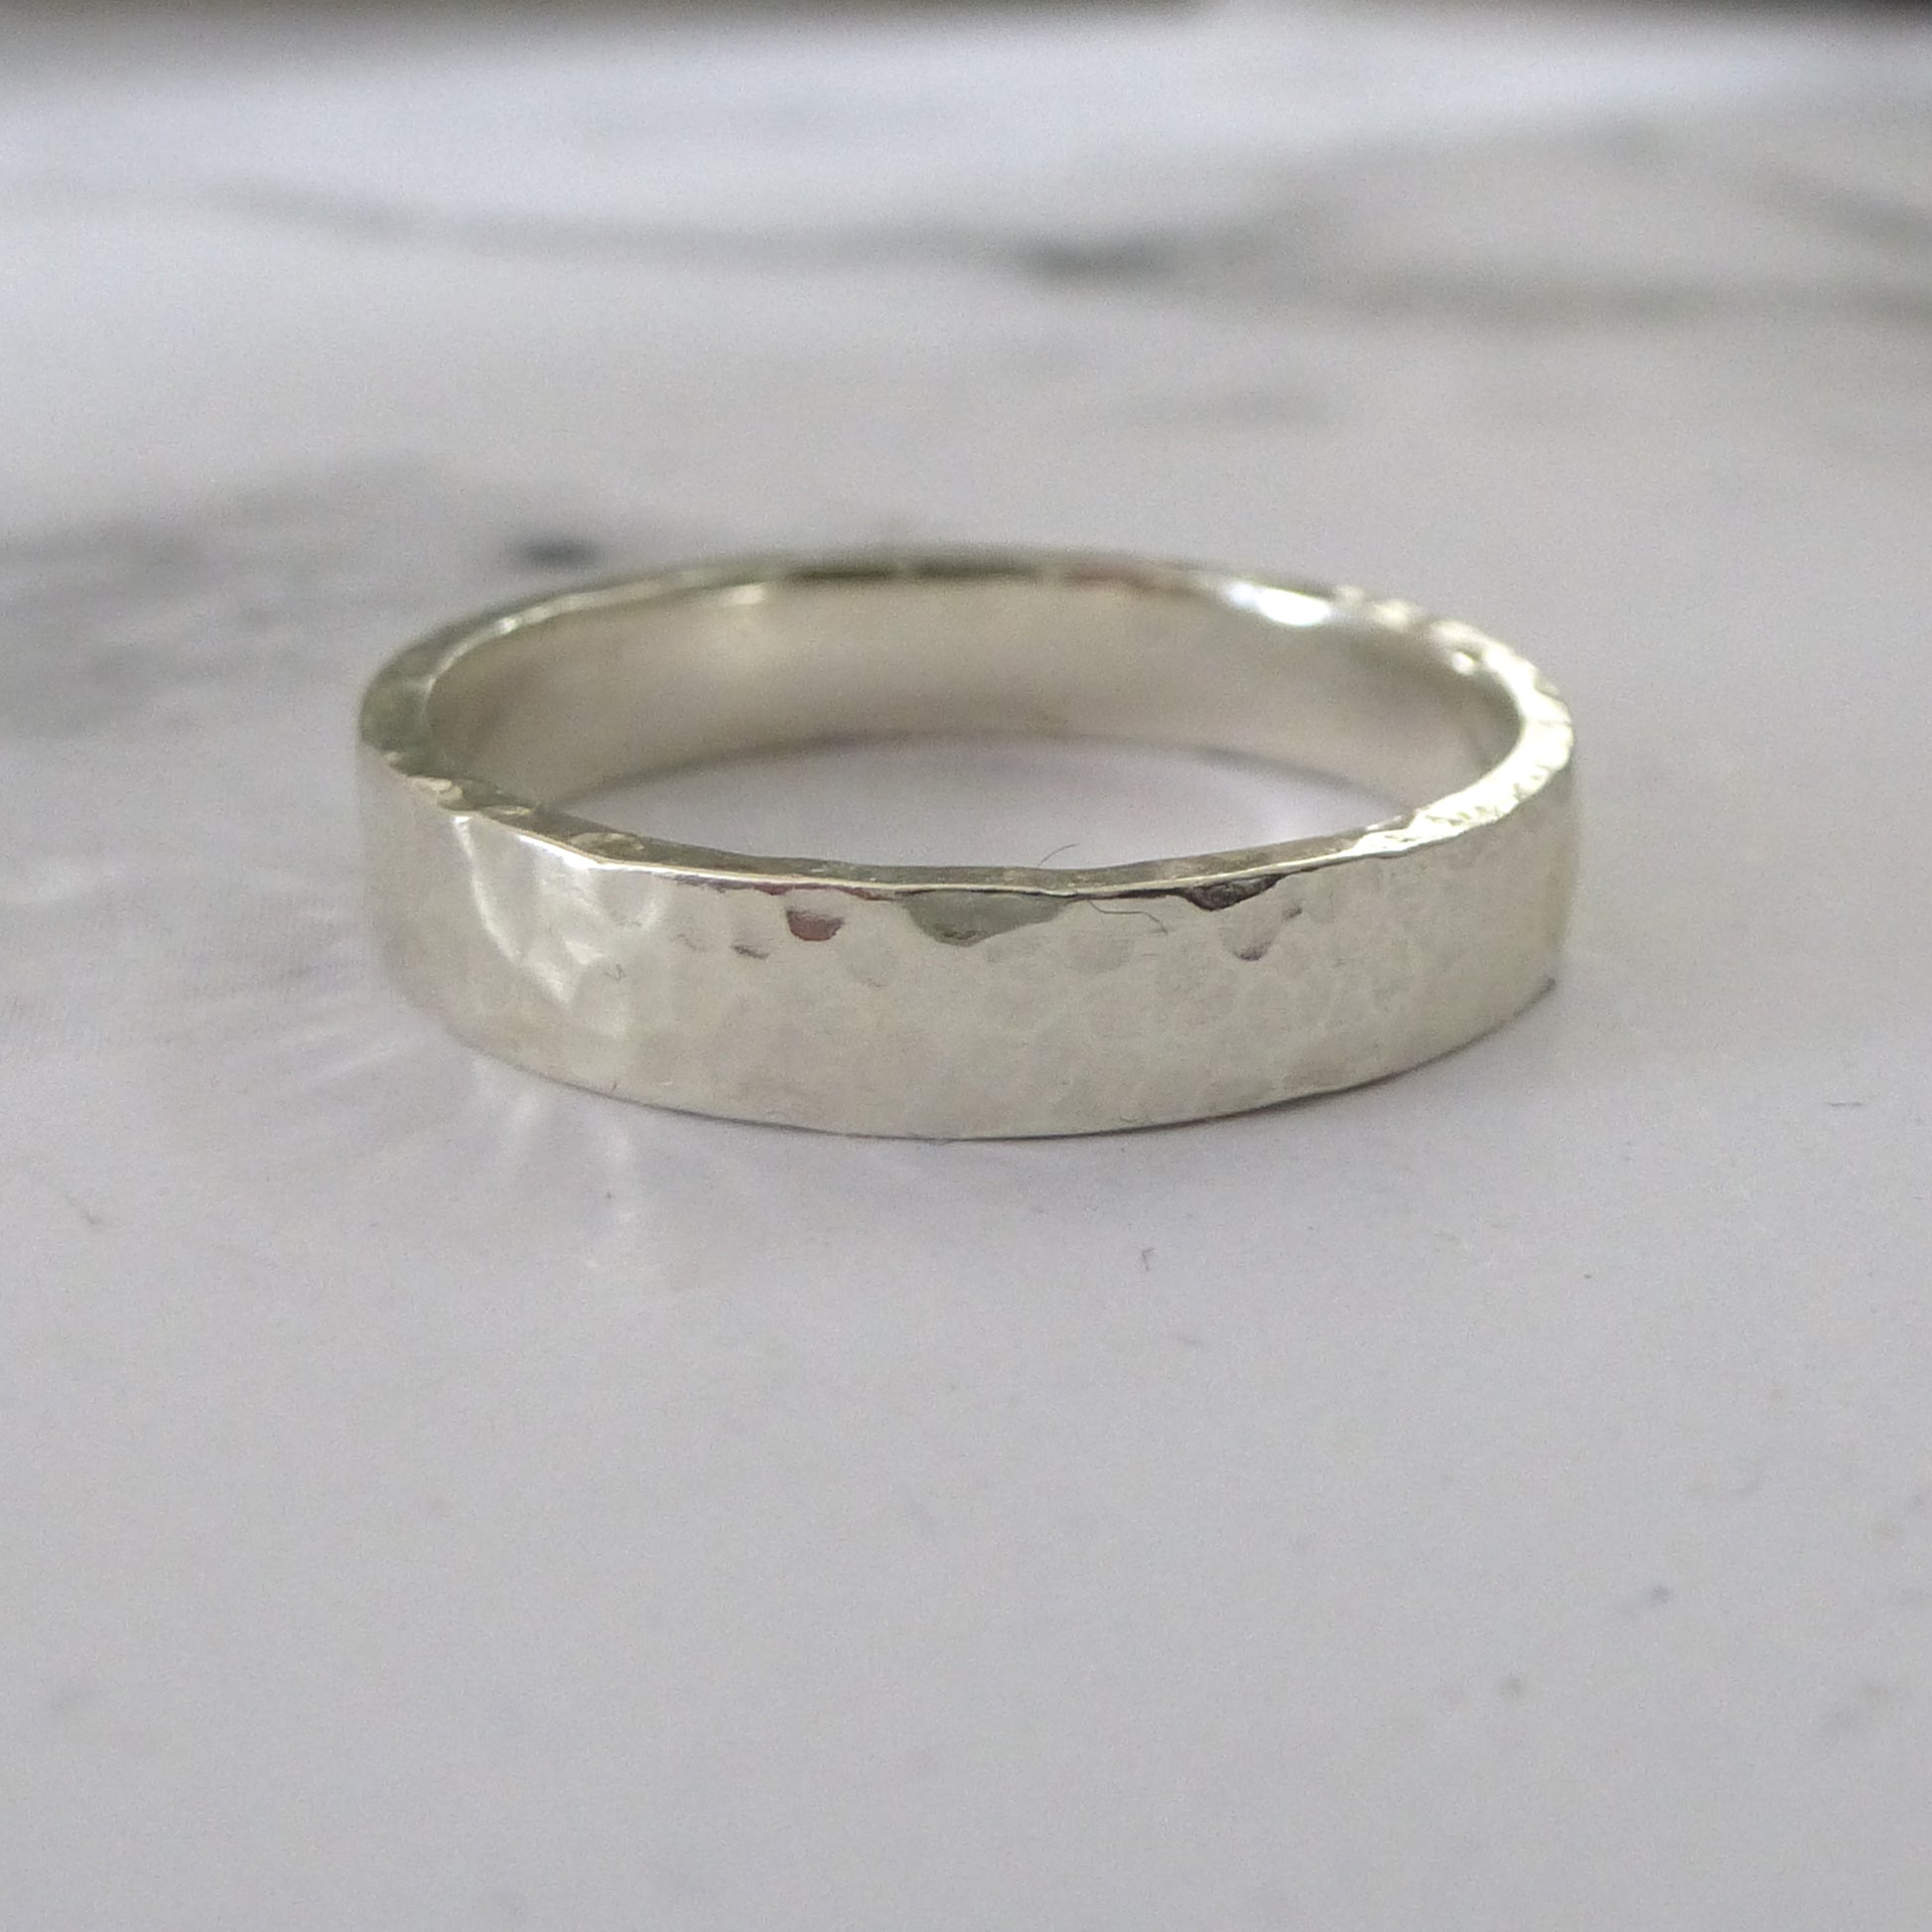 4mm hand made wedding ring, recycled 9ct yellow gold, hammered finish, square profile